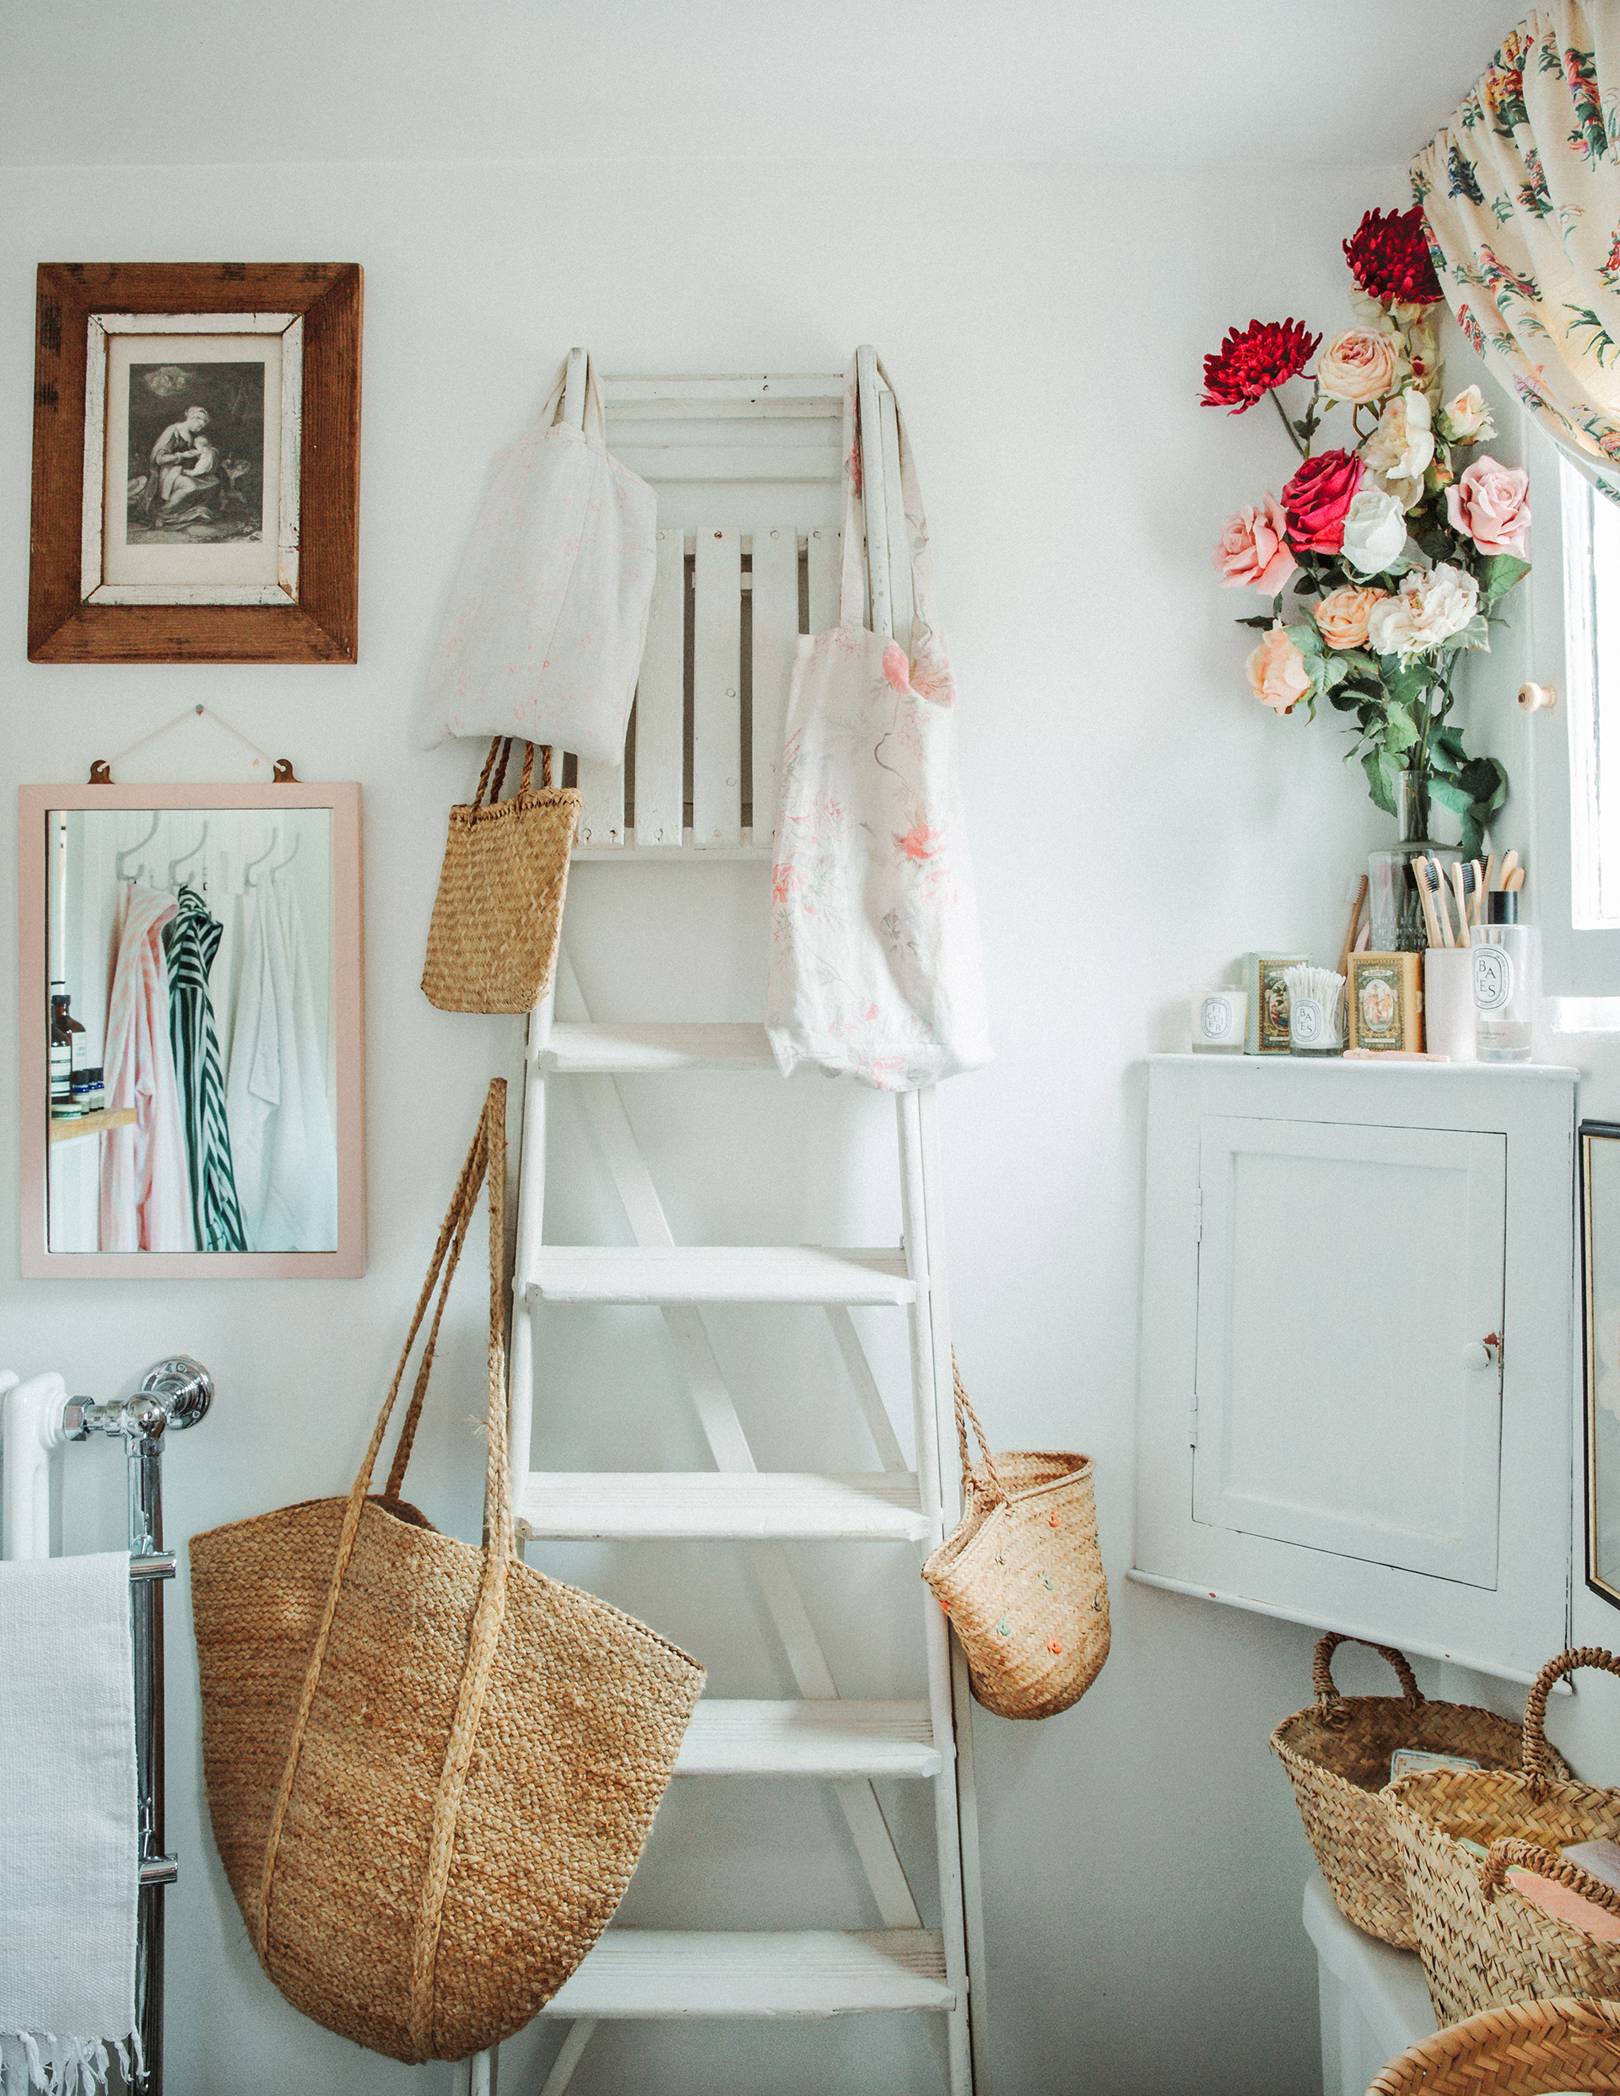 a leaning ladder as storage in the bath | violet dent romantic eclectic house tour